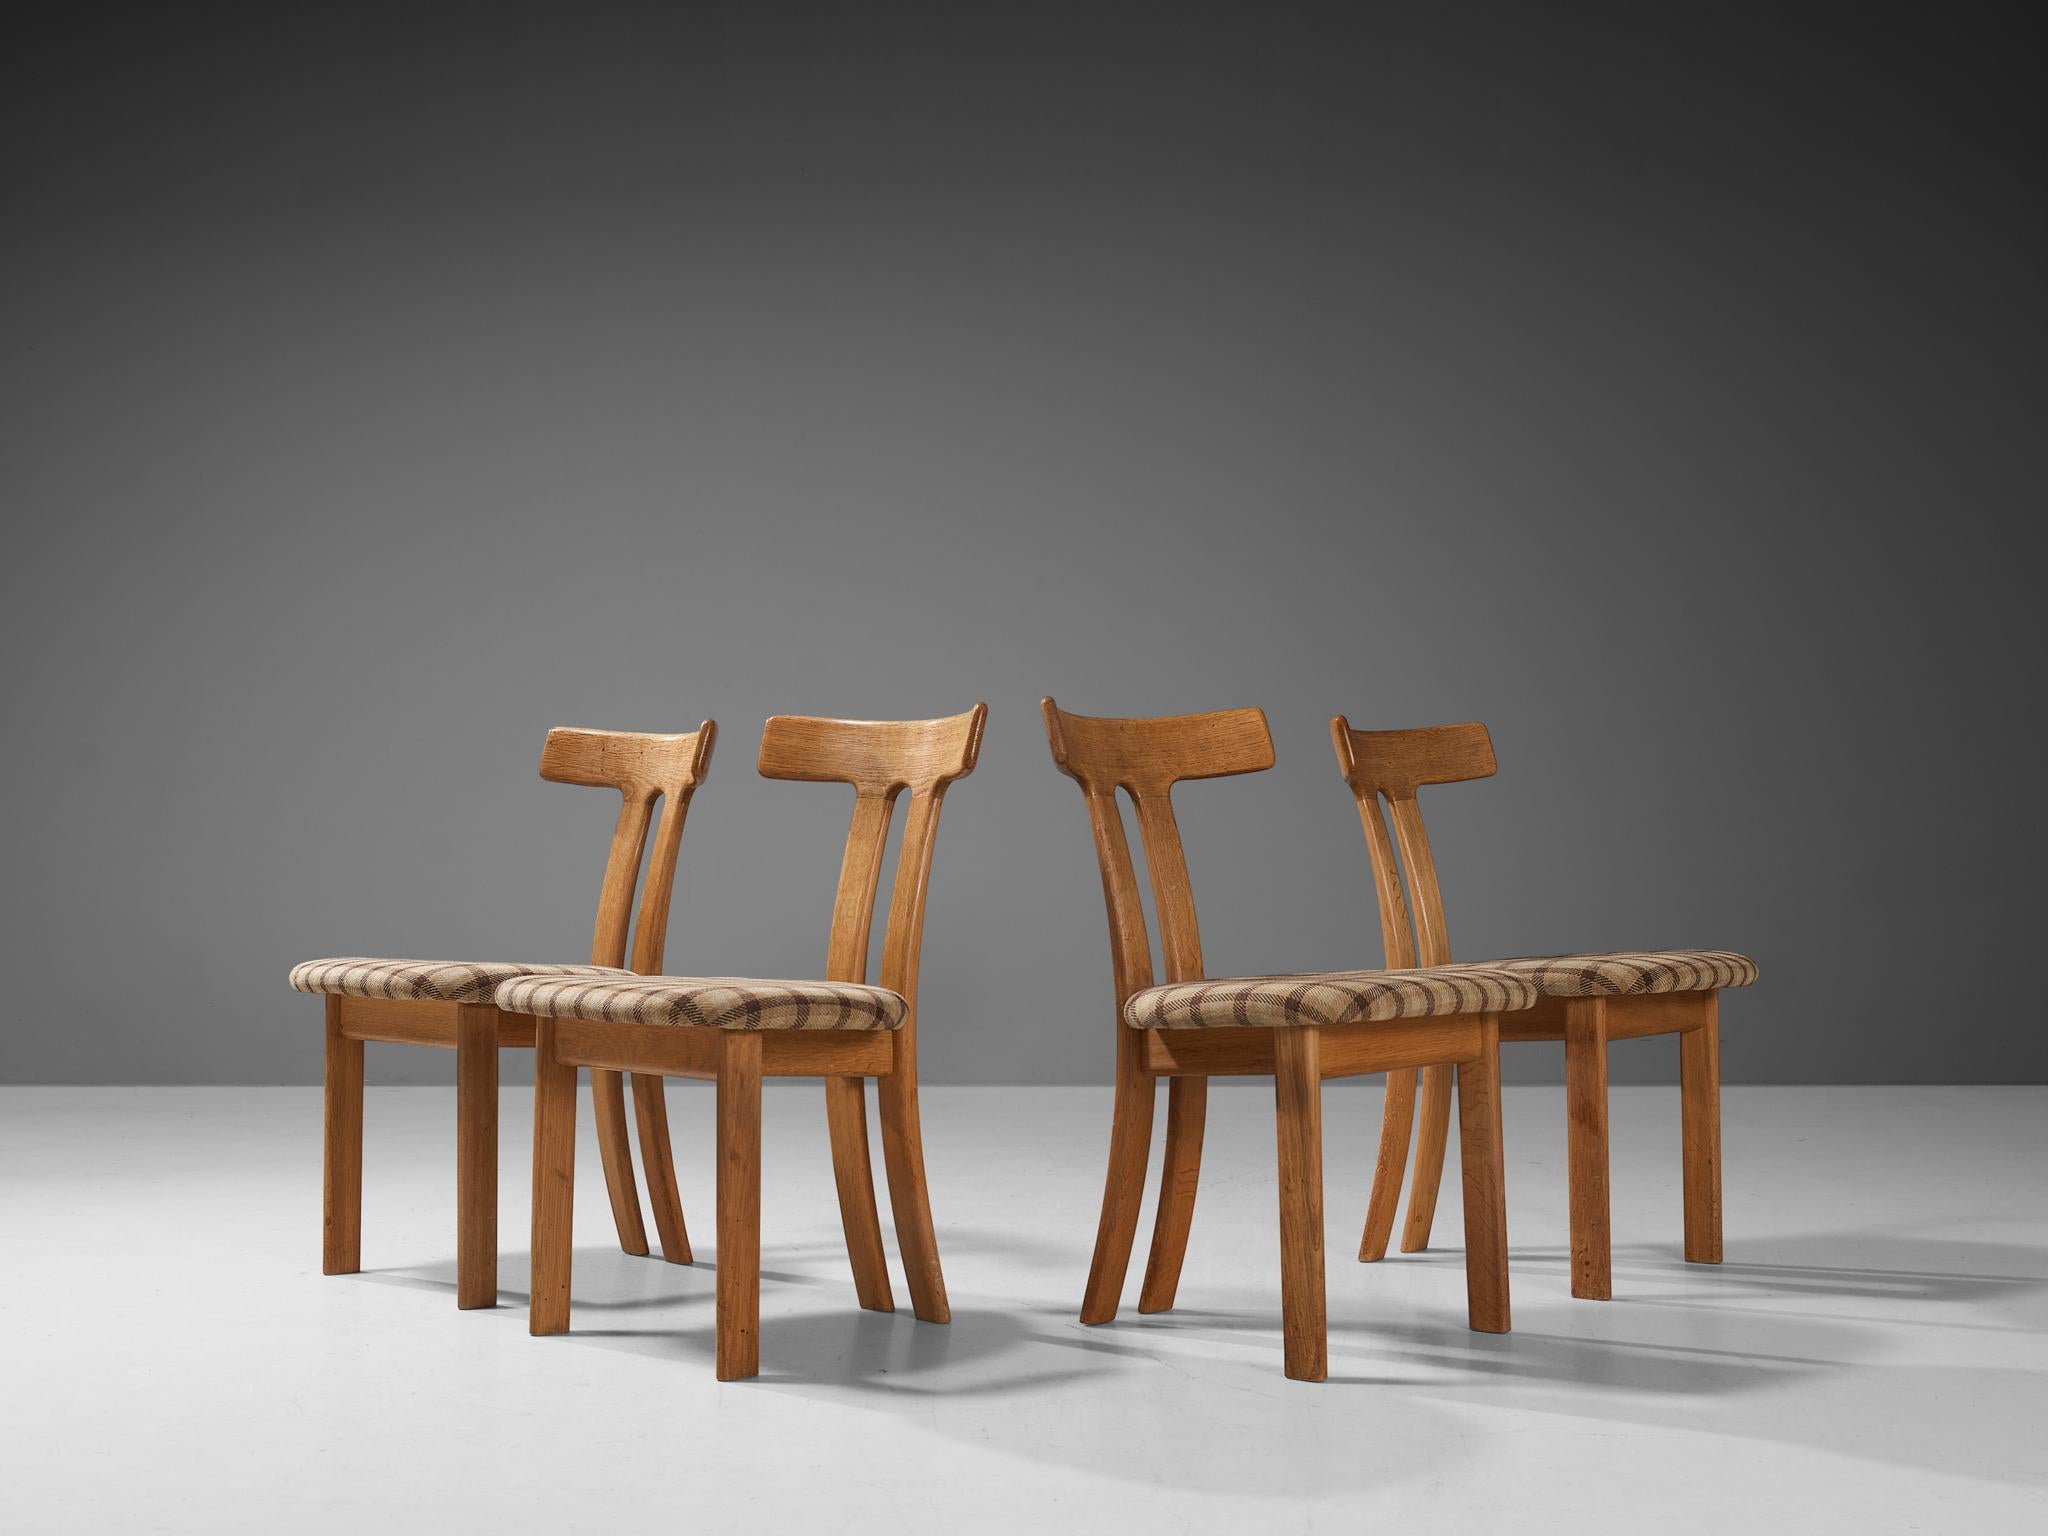 Set of four dining chairs, oak, fabric, France, 1960s. 

These dining chairs have a strong resemblance to Carl Hansen's t-chair and the dining chairs by Sapporo for Mobil Girgi, yet this design is different in its details. Strong vertical and